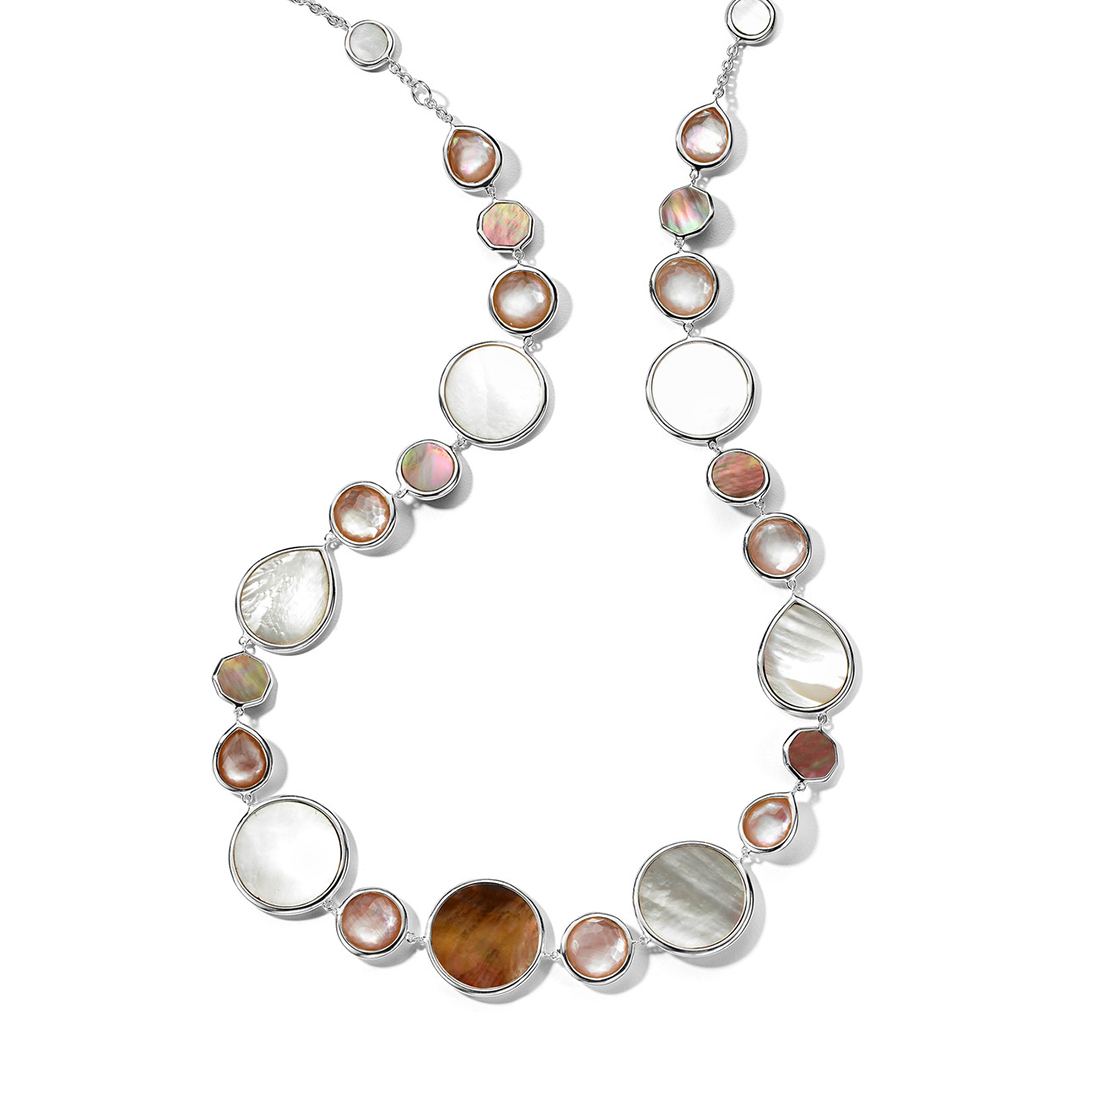 IPPOLITA  Polished Rock Candy Sterling Silver Collar Necklace in Dahlia